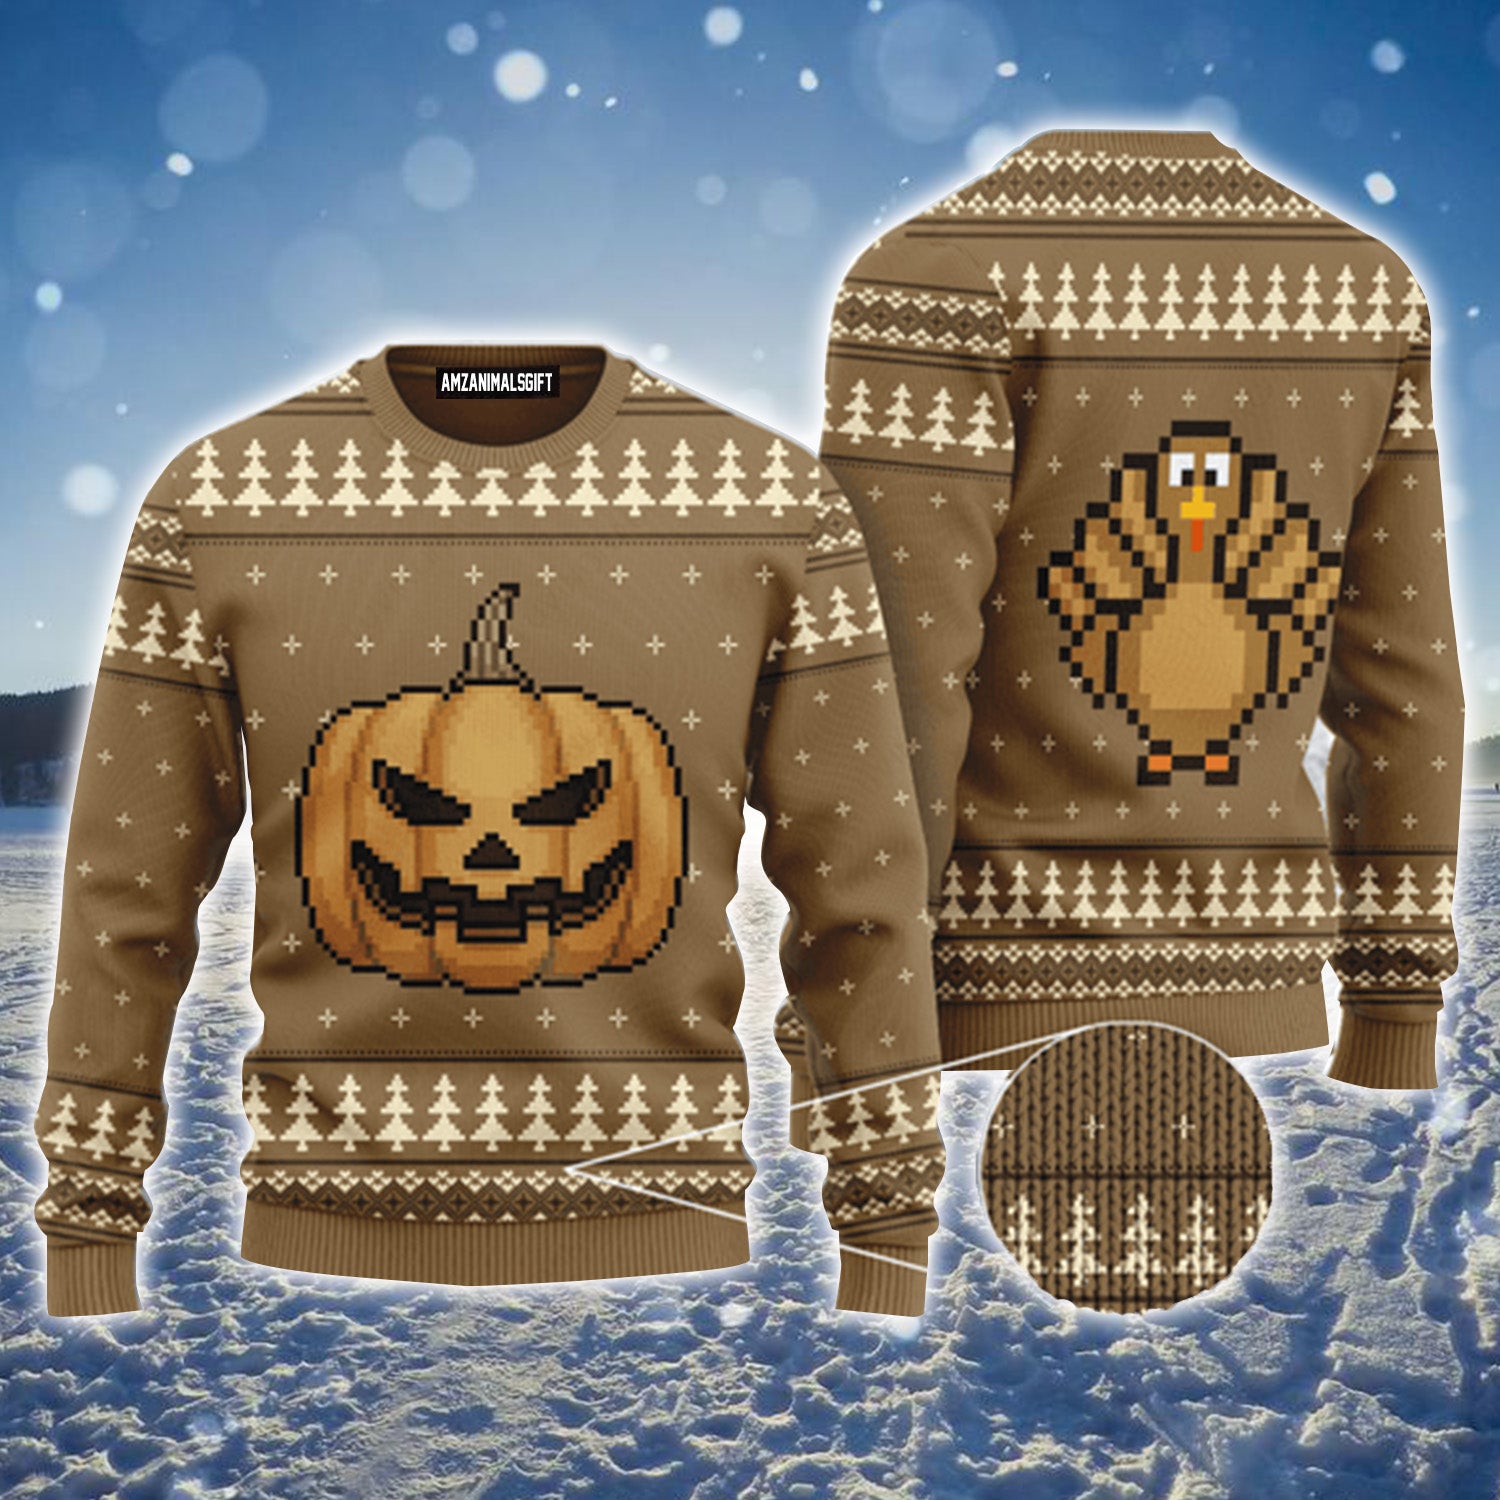 Thanksgiving Pumpkin Turkey Urly Sweater, Thanksgiving Sweater For Men & Women - Perfect Gift For Thanksgiving, New Year, Winter, Christmas